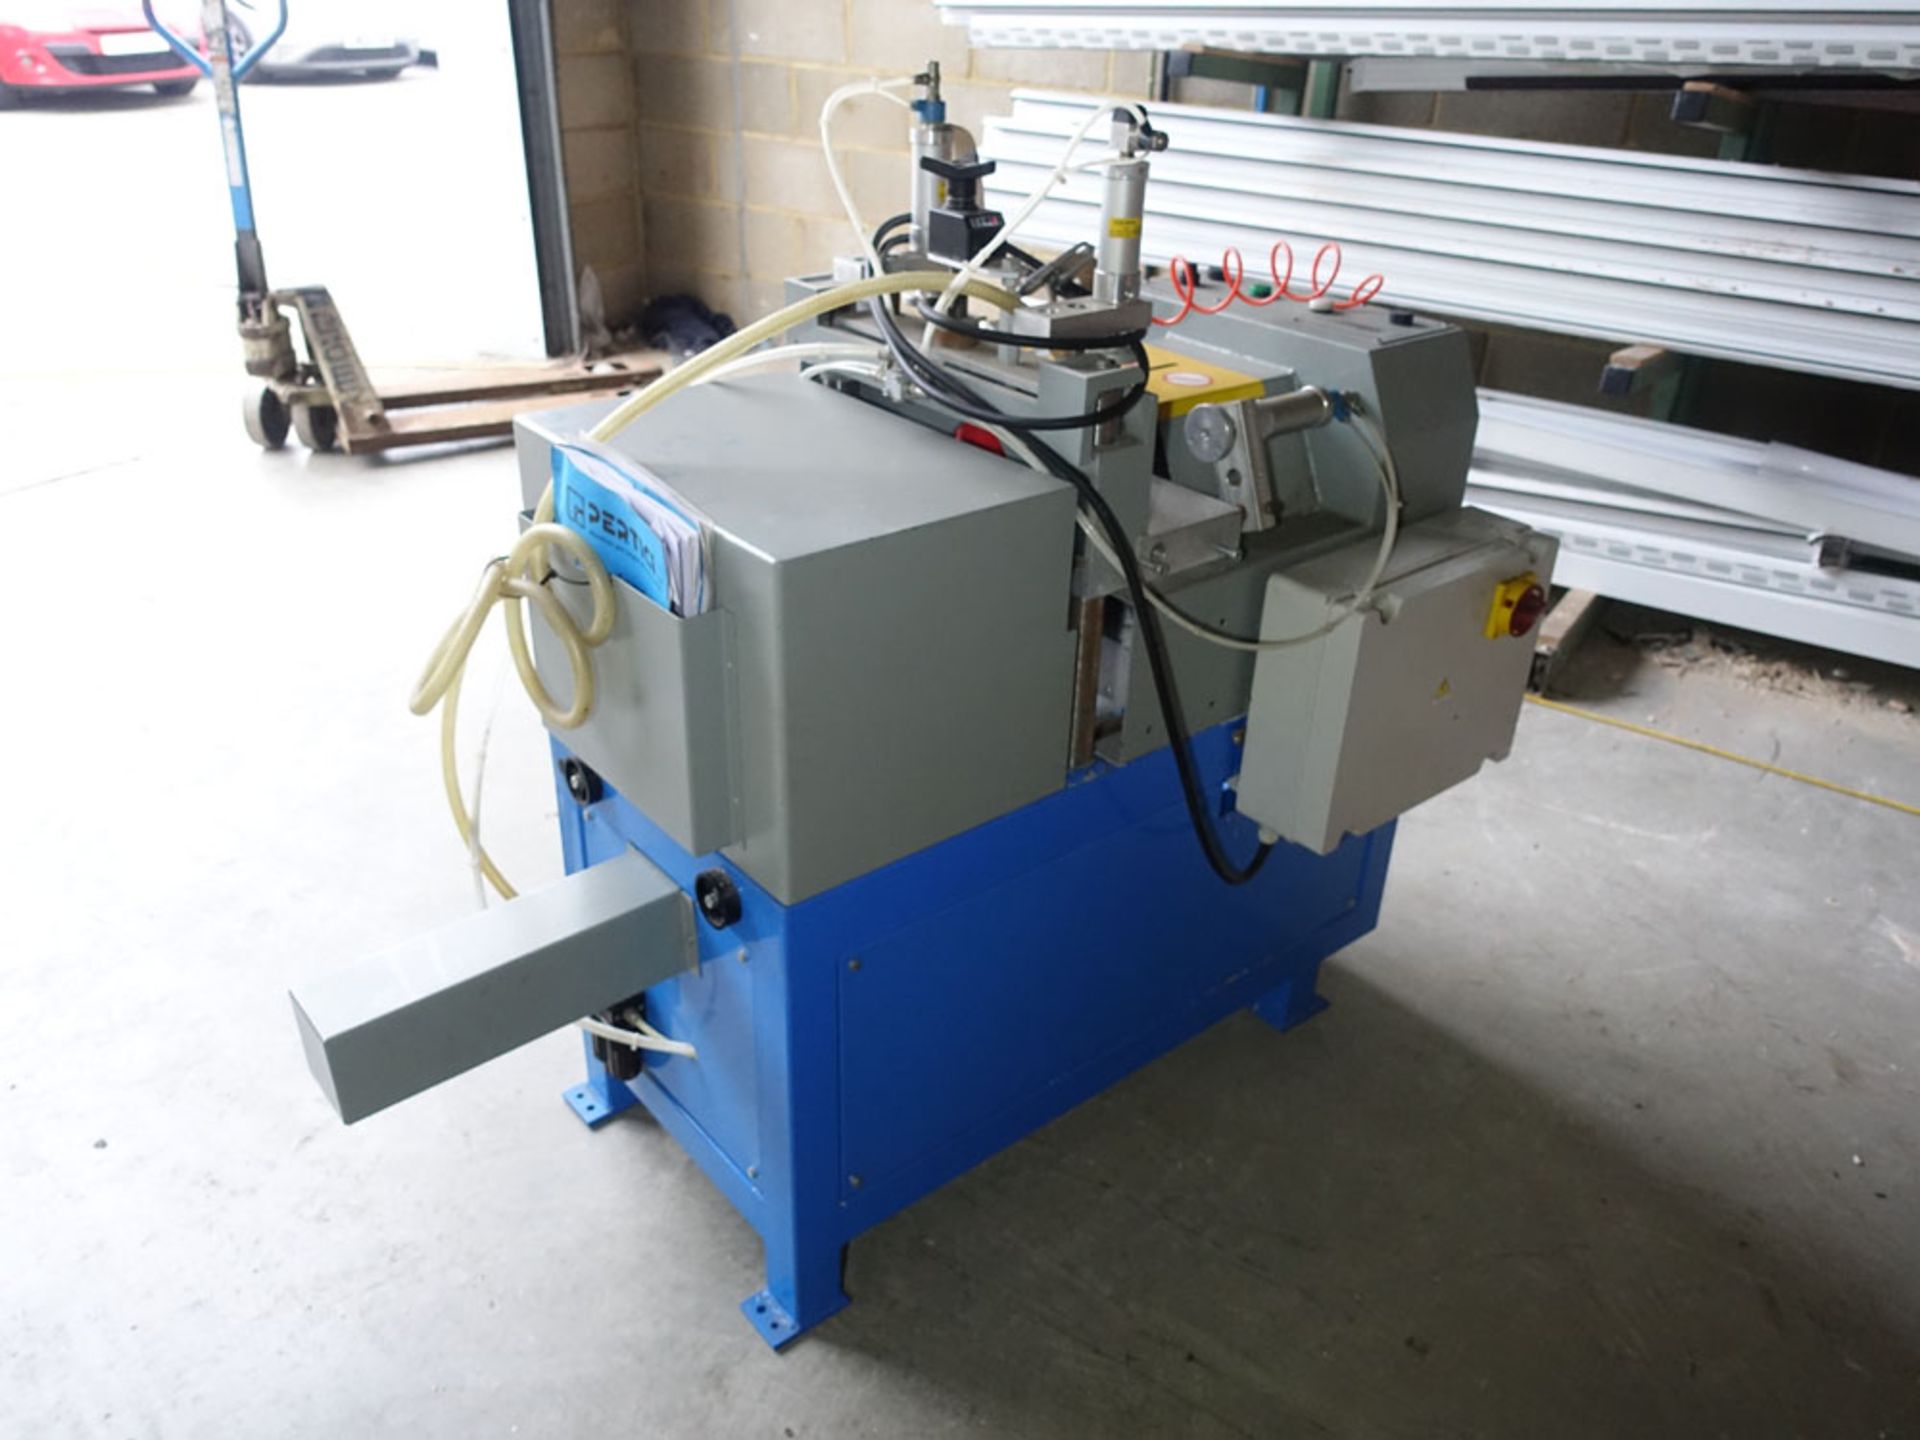 Pertici Univer model VC721 aluminium extrusion saw Serial number 06V110 Year 2006 - Image 4 of 7